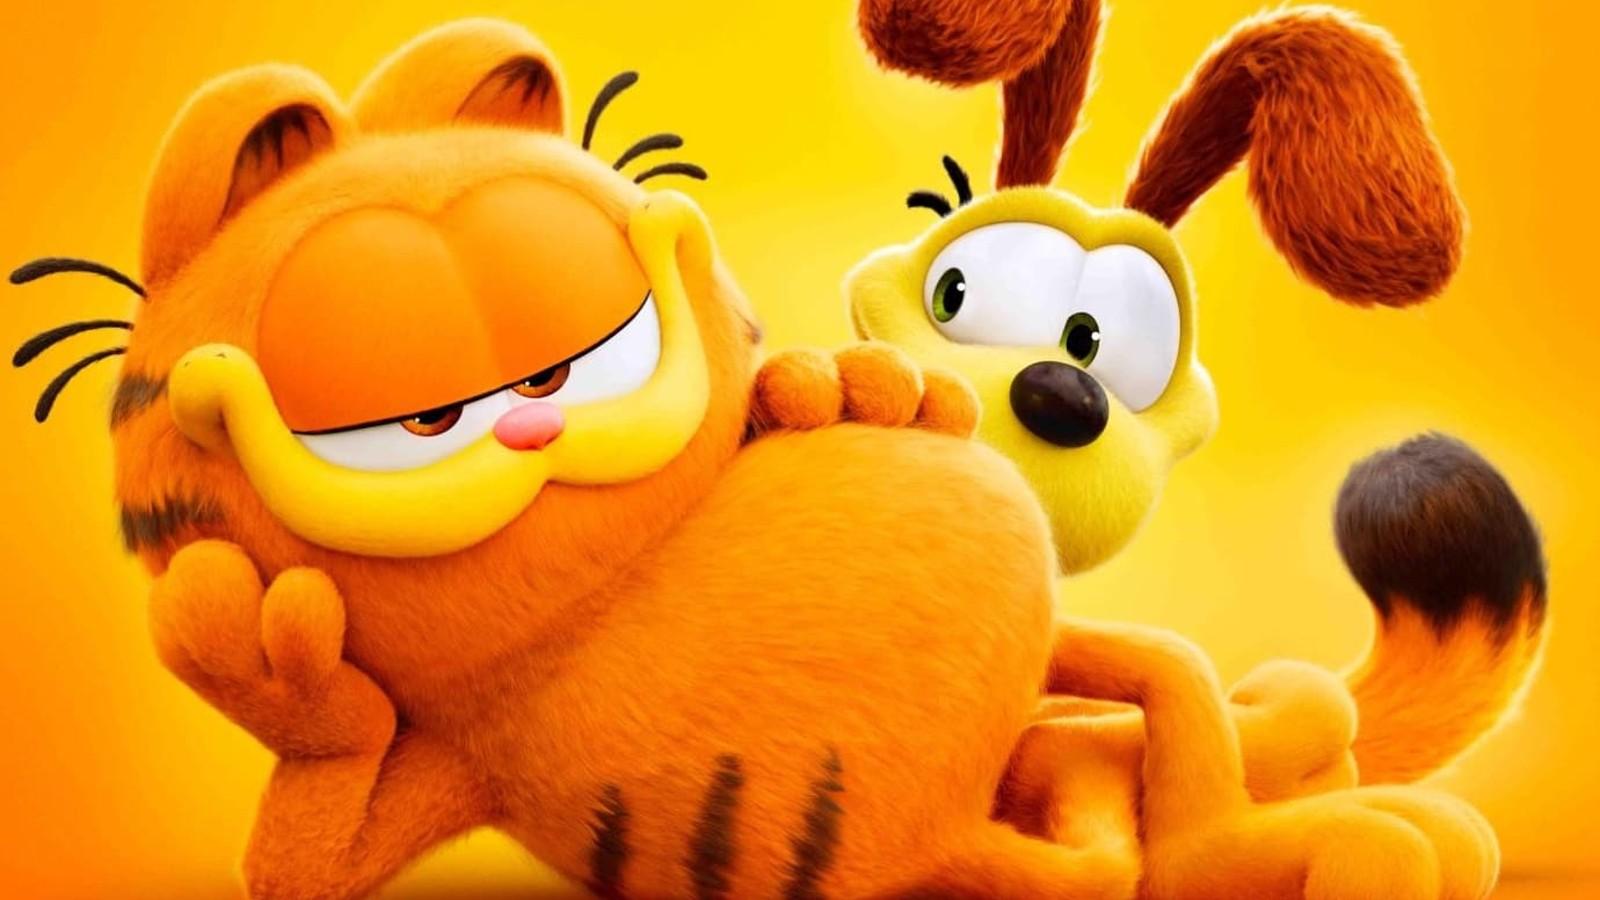 Odie the dog leaning on Garfield the cat.